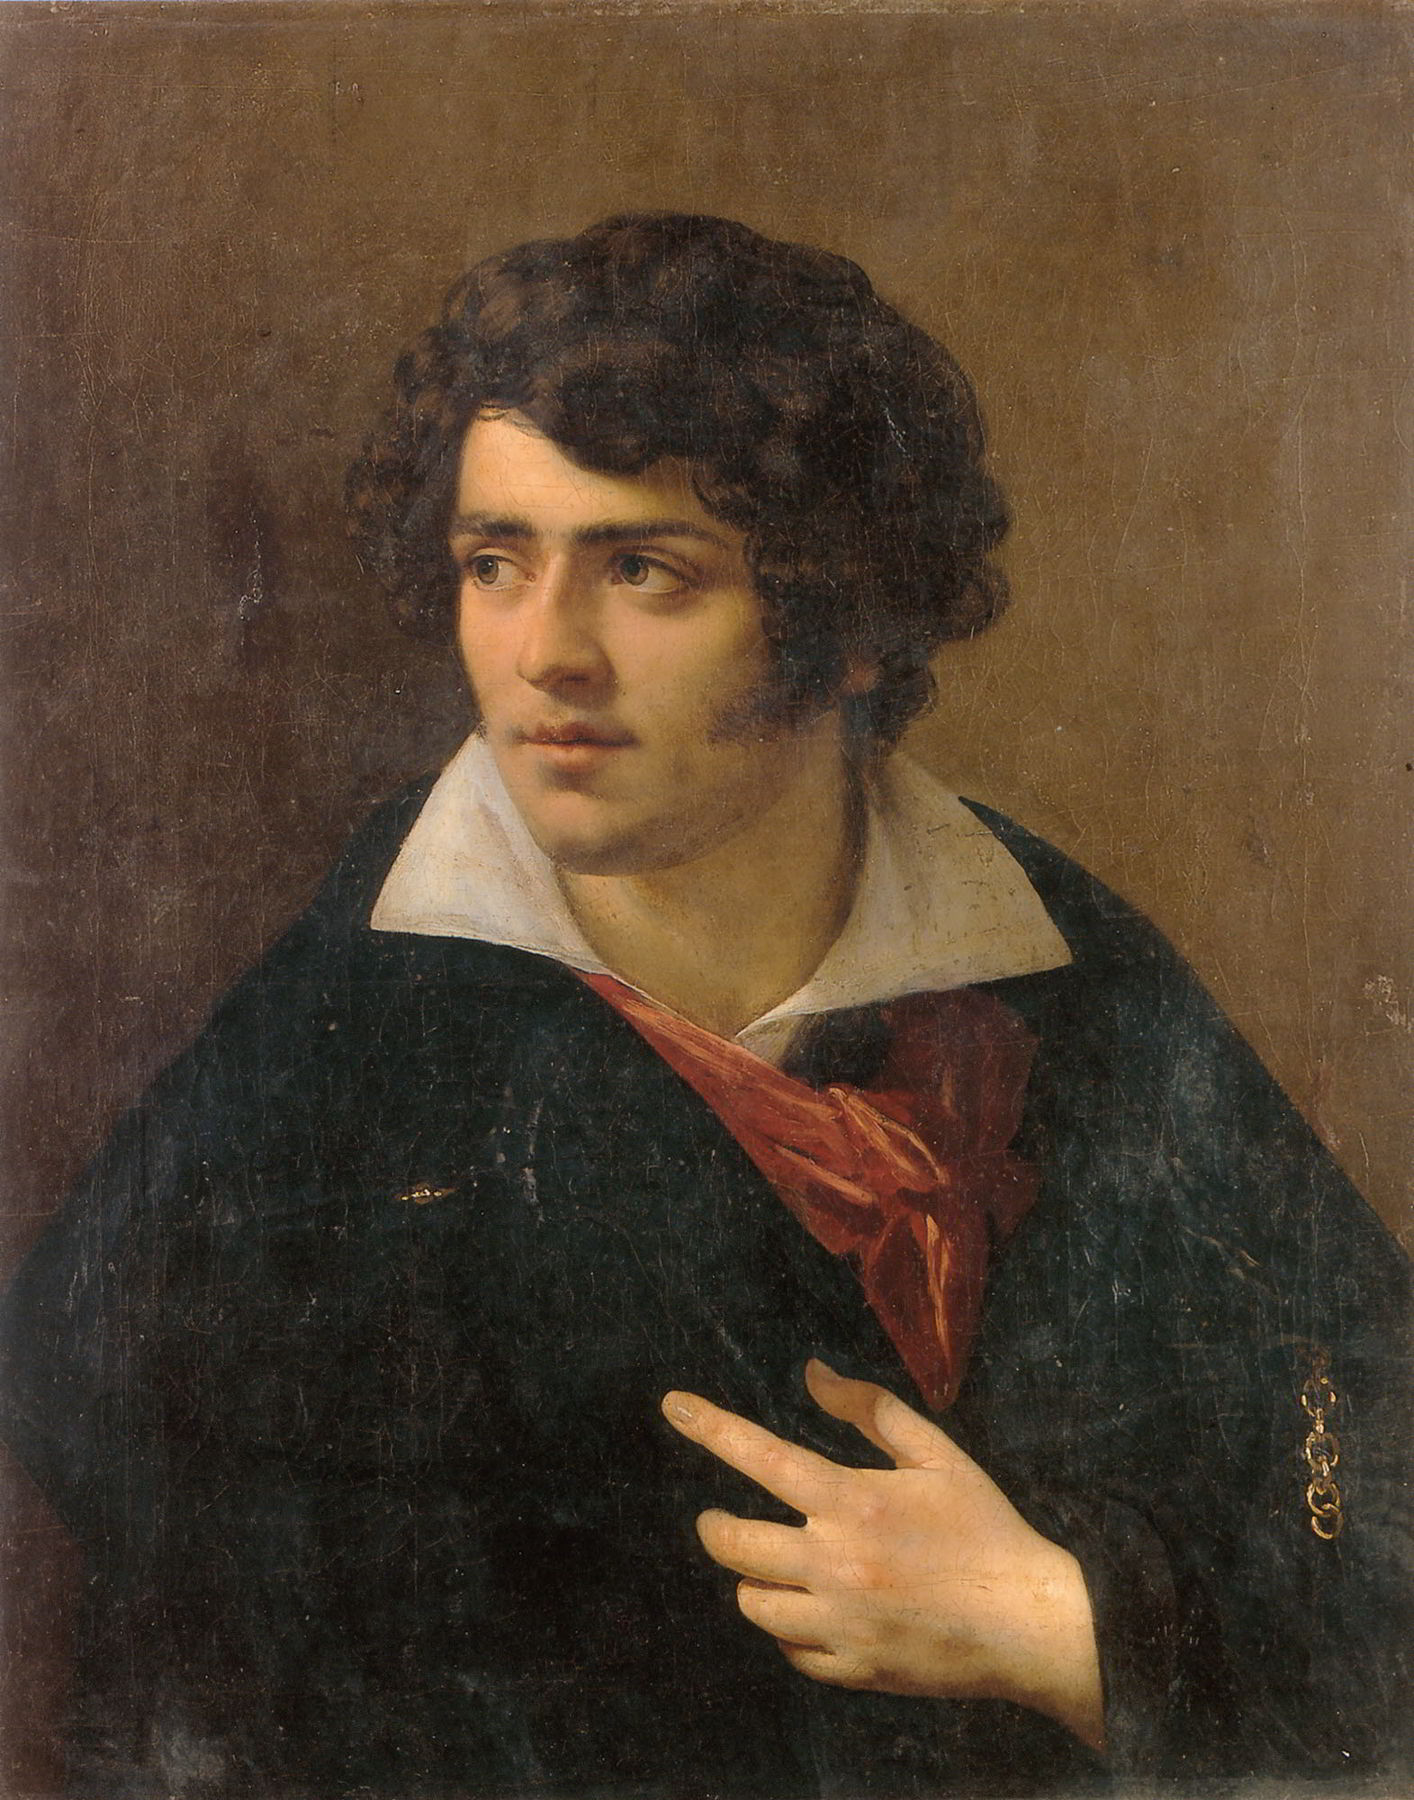 Portrait of a Young Man by Anne Louis Girodet de Roucy Triosson